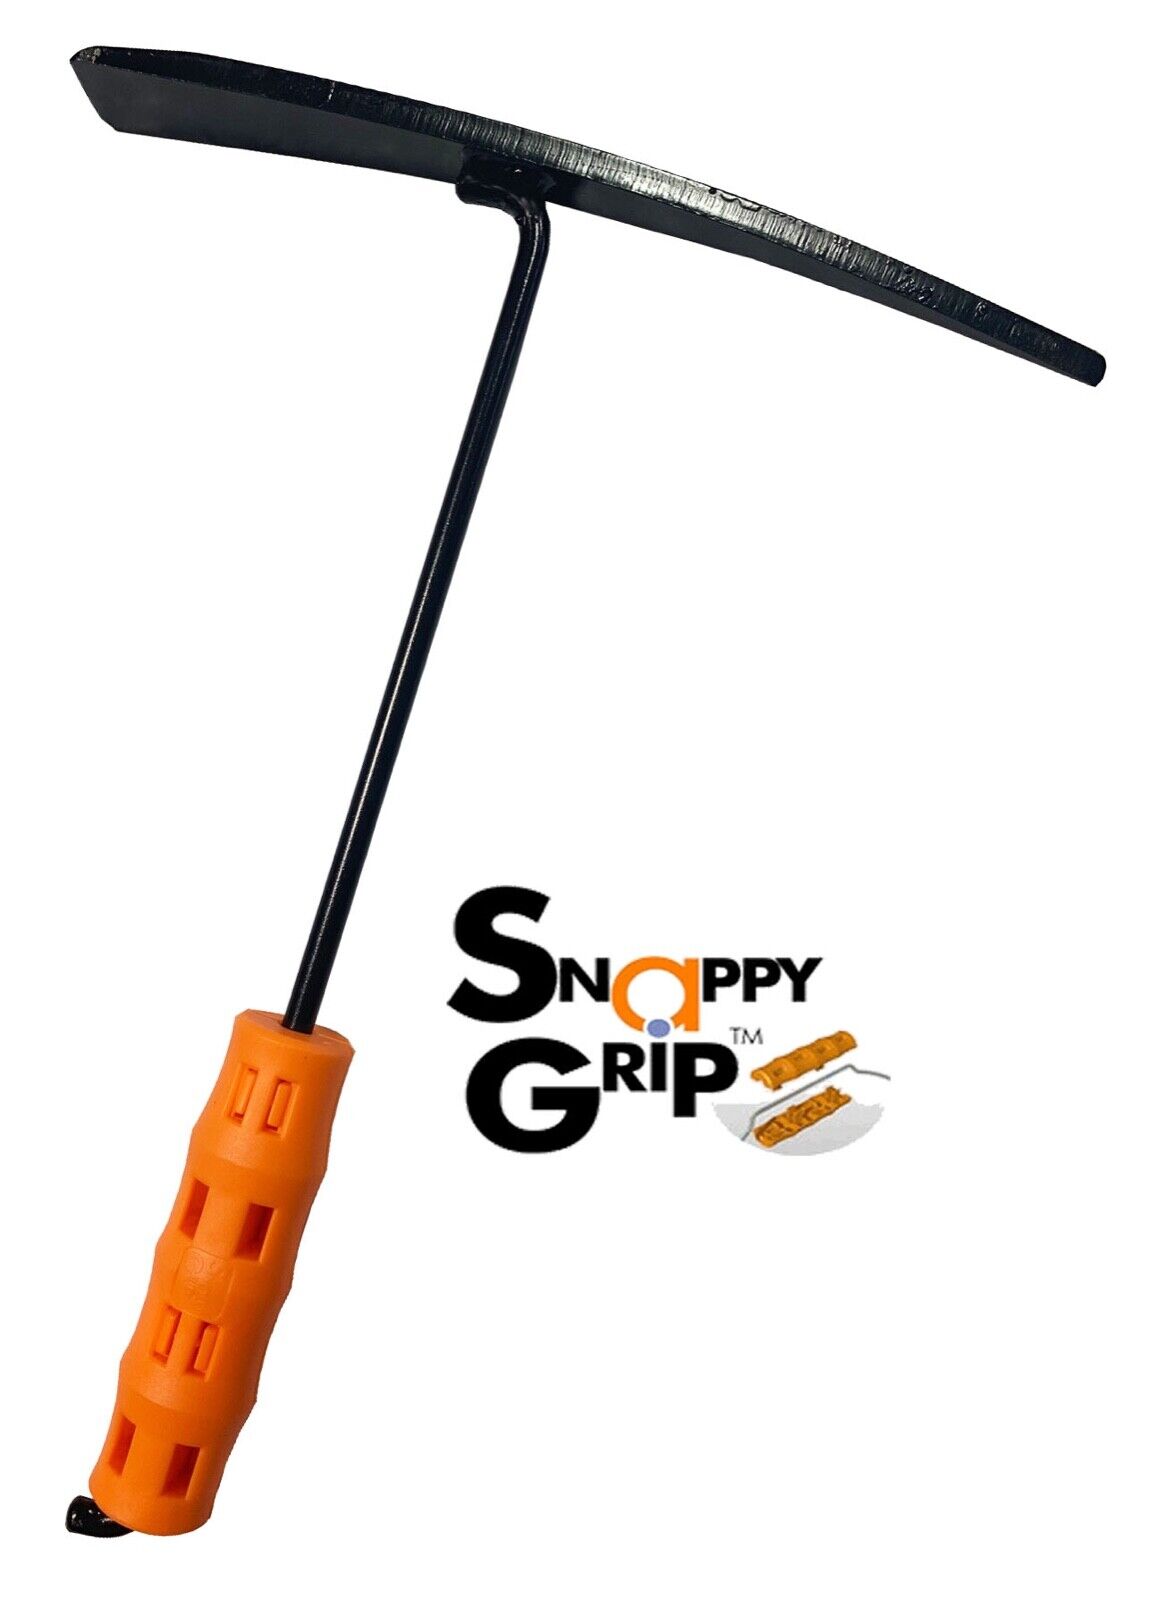 SNAPPY GRIP Mini Light Weight Pick Tool Crevice DIG GOLD Crevicing Sniping 12